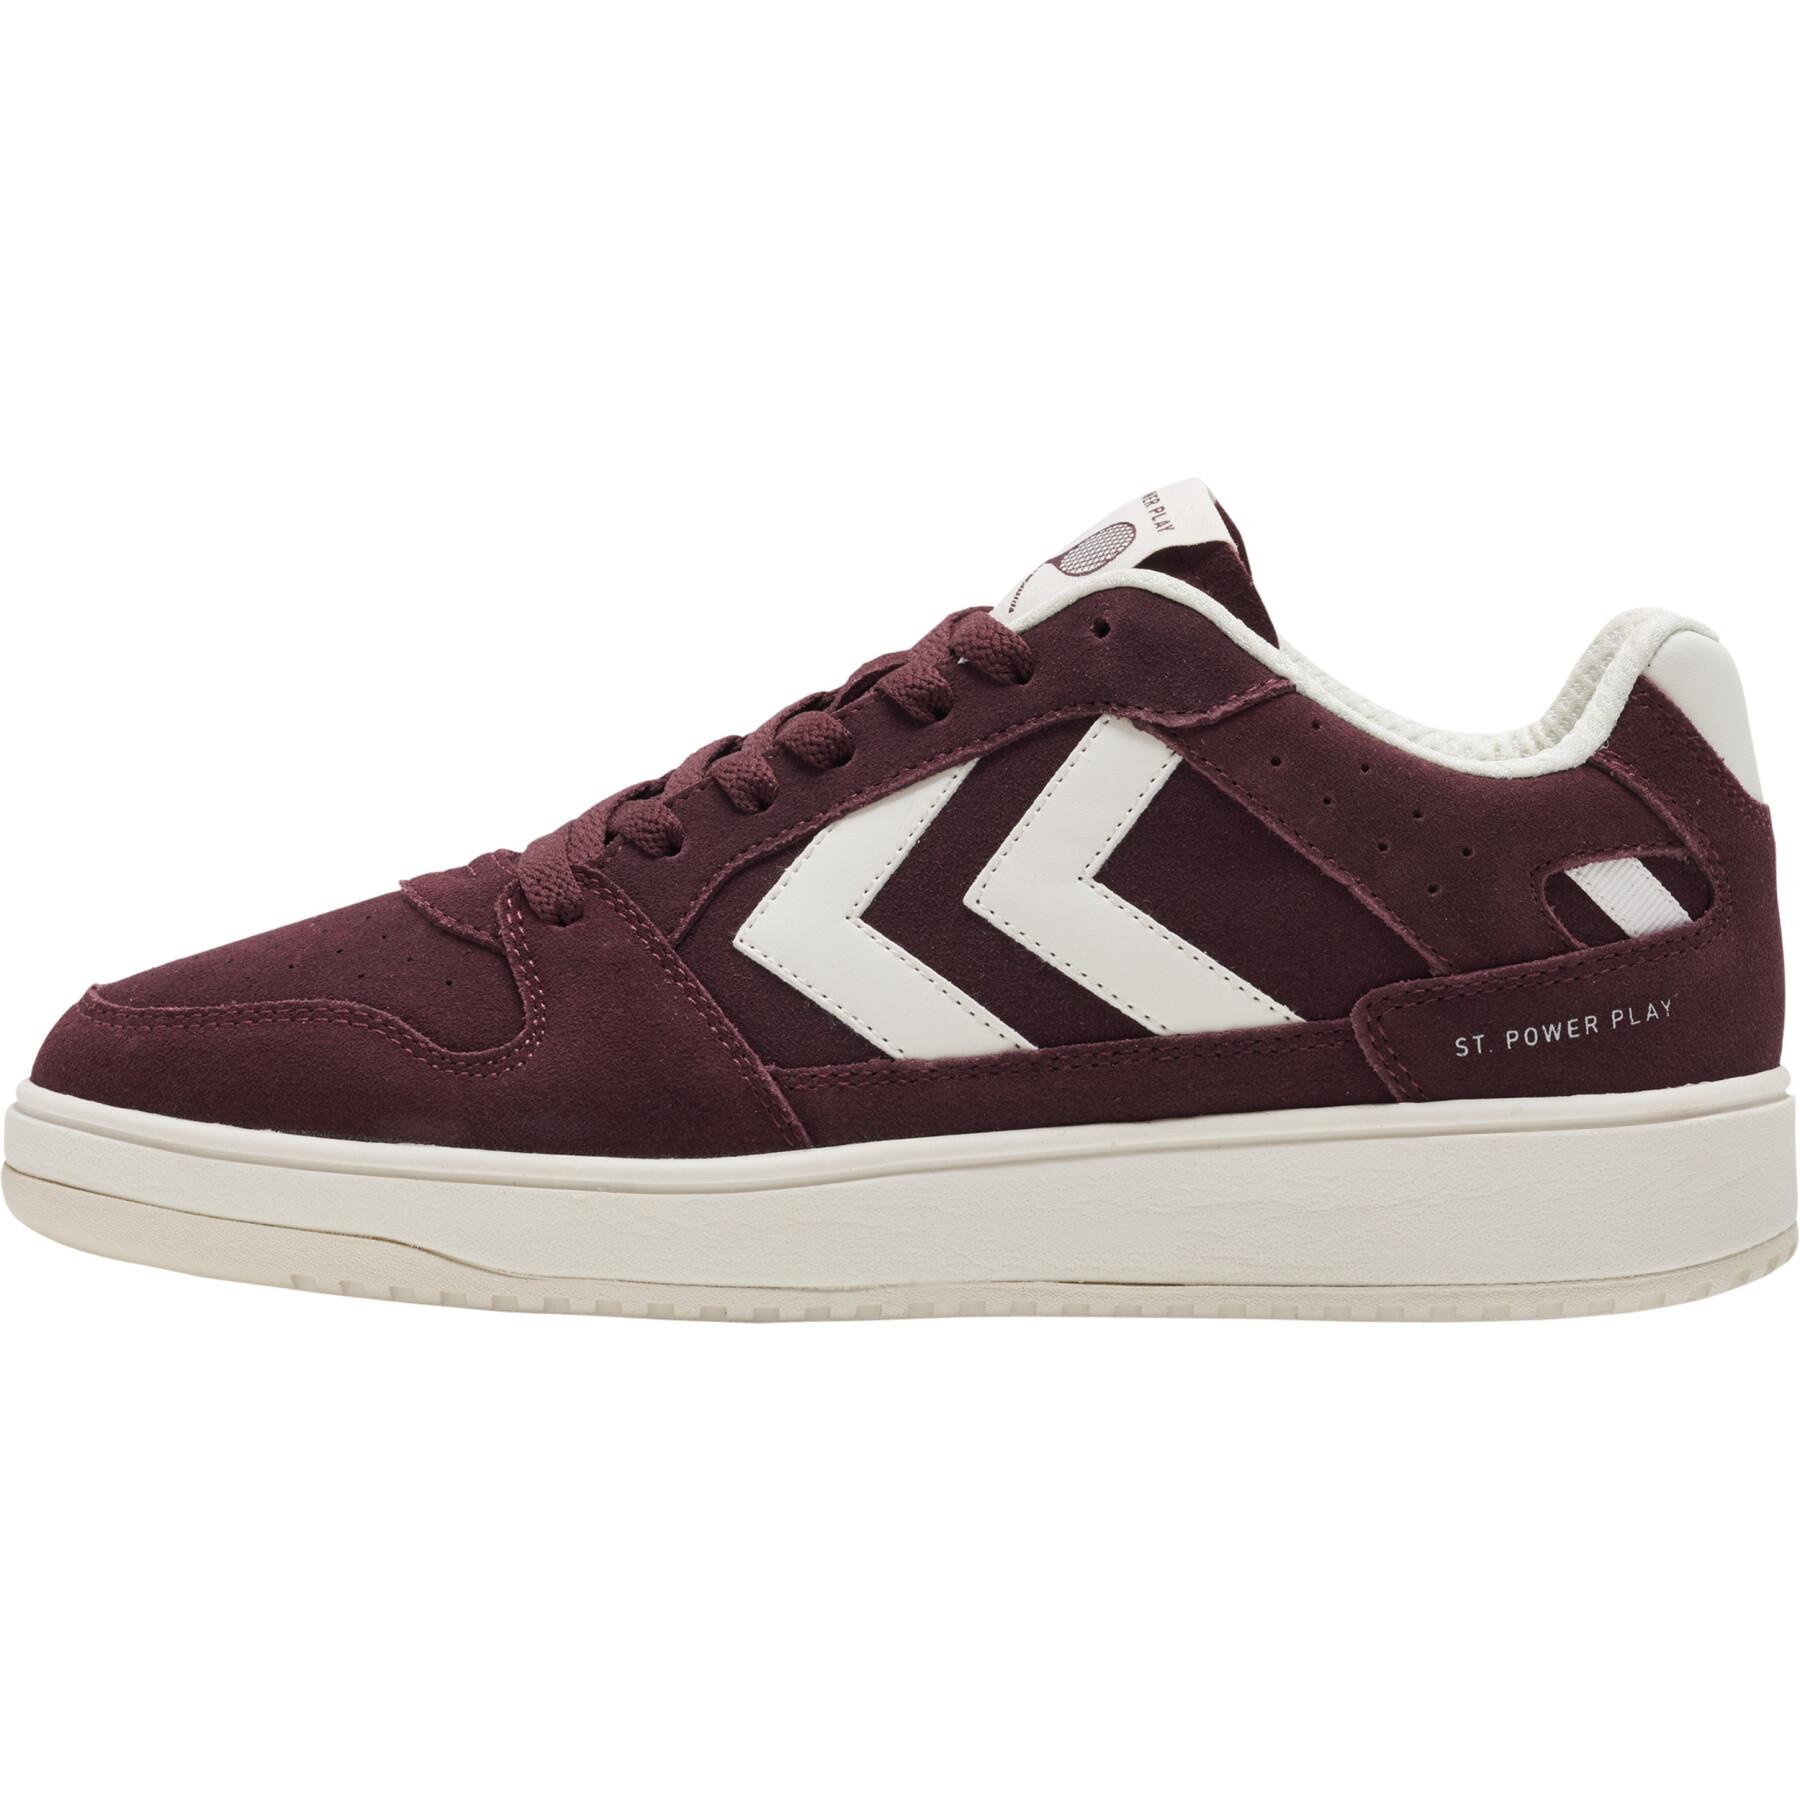 Sneakers Hummel St. Play Brands Hummel - Suede - - Power Lifestyle